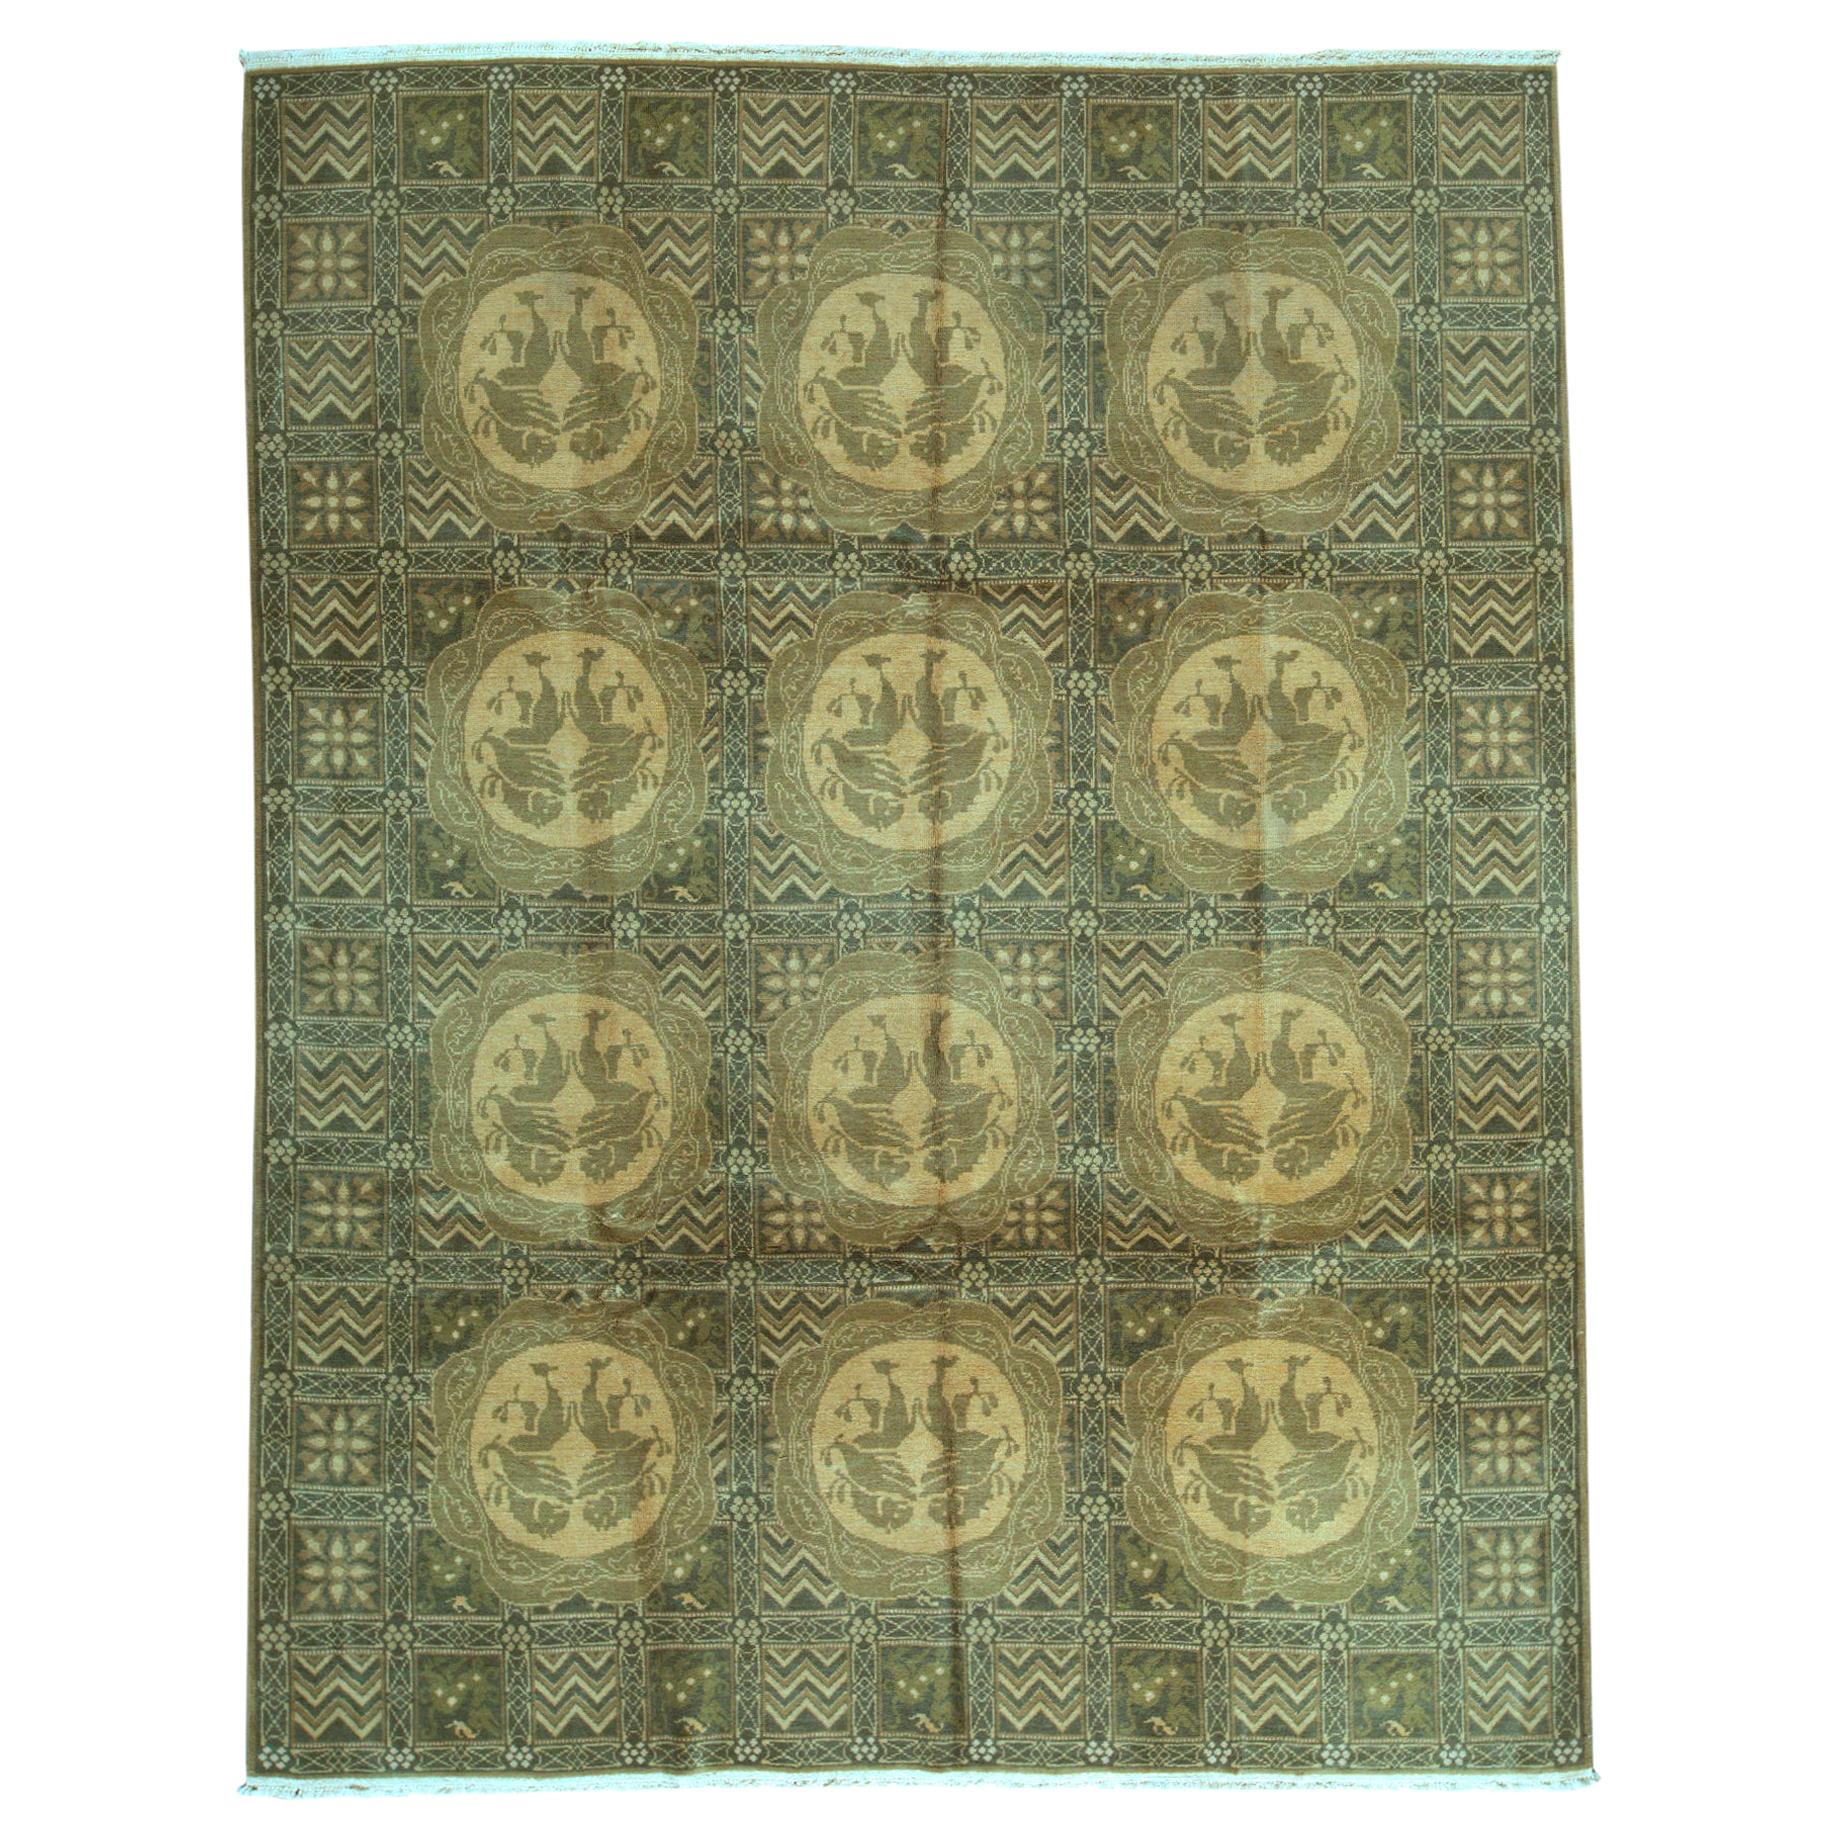  Traditional Handwoven Luxury Wool Semi Antique Ivory / Green Rug. For Sale